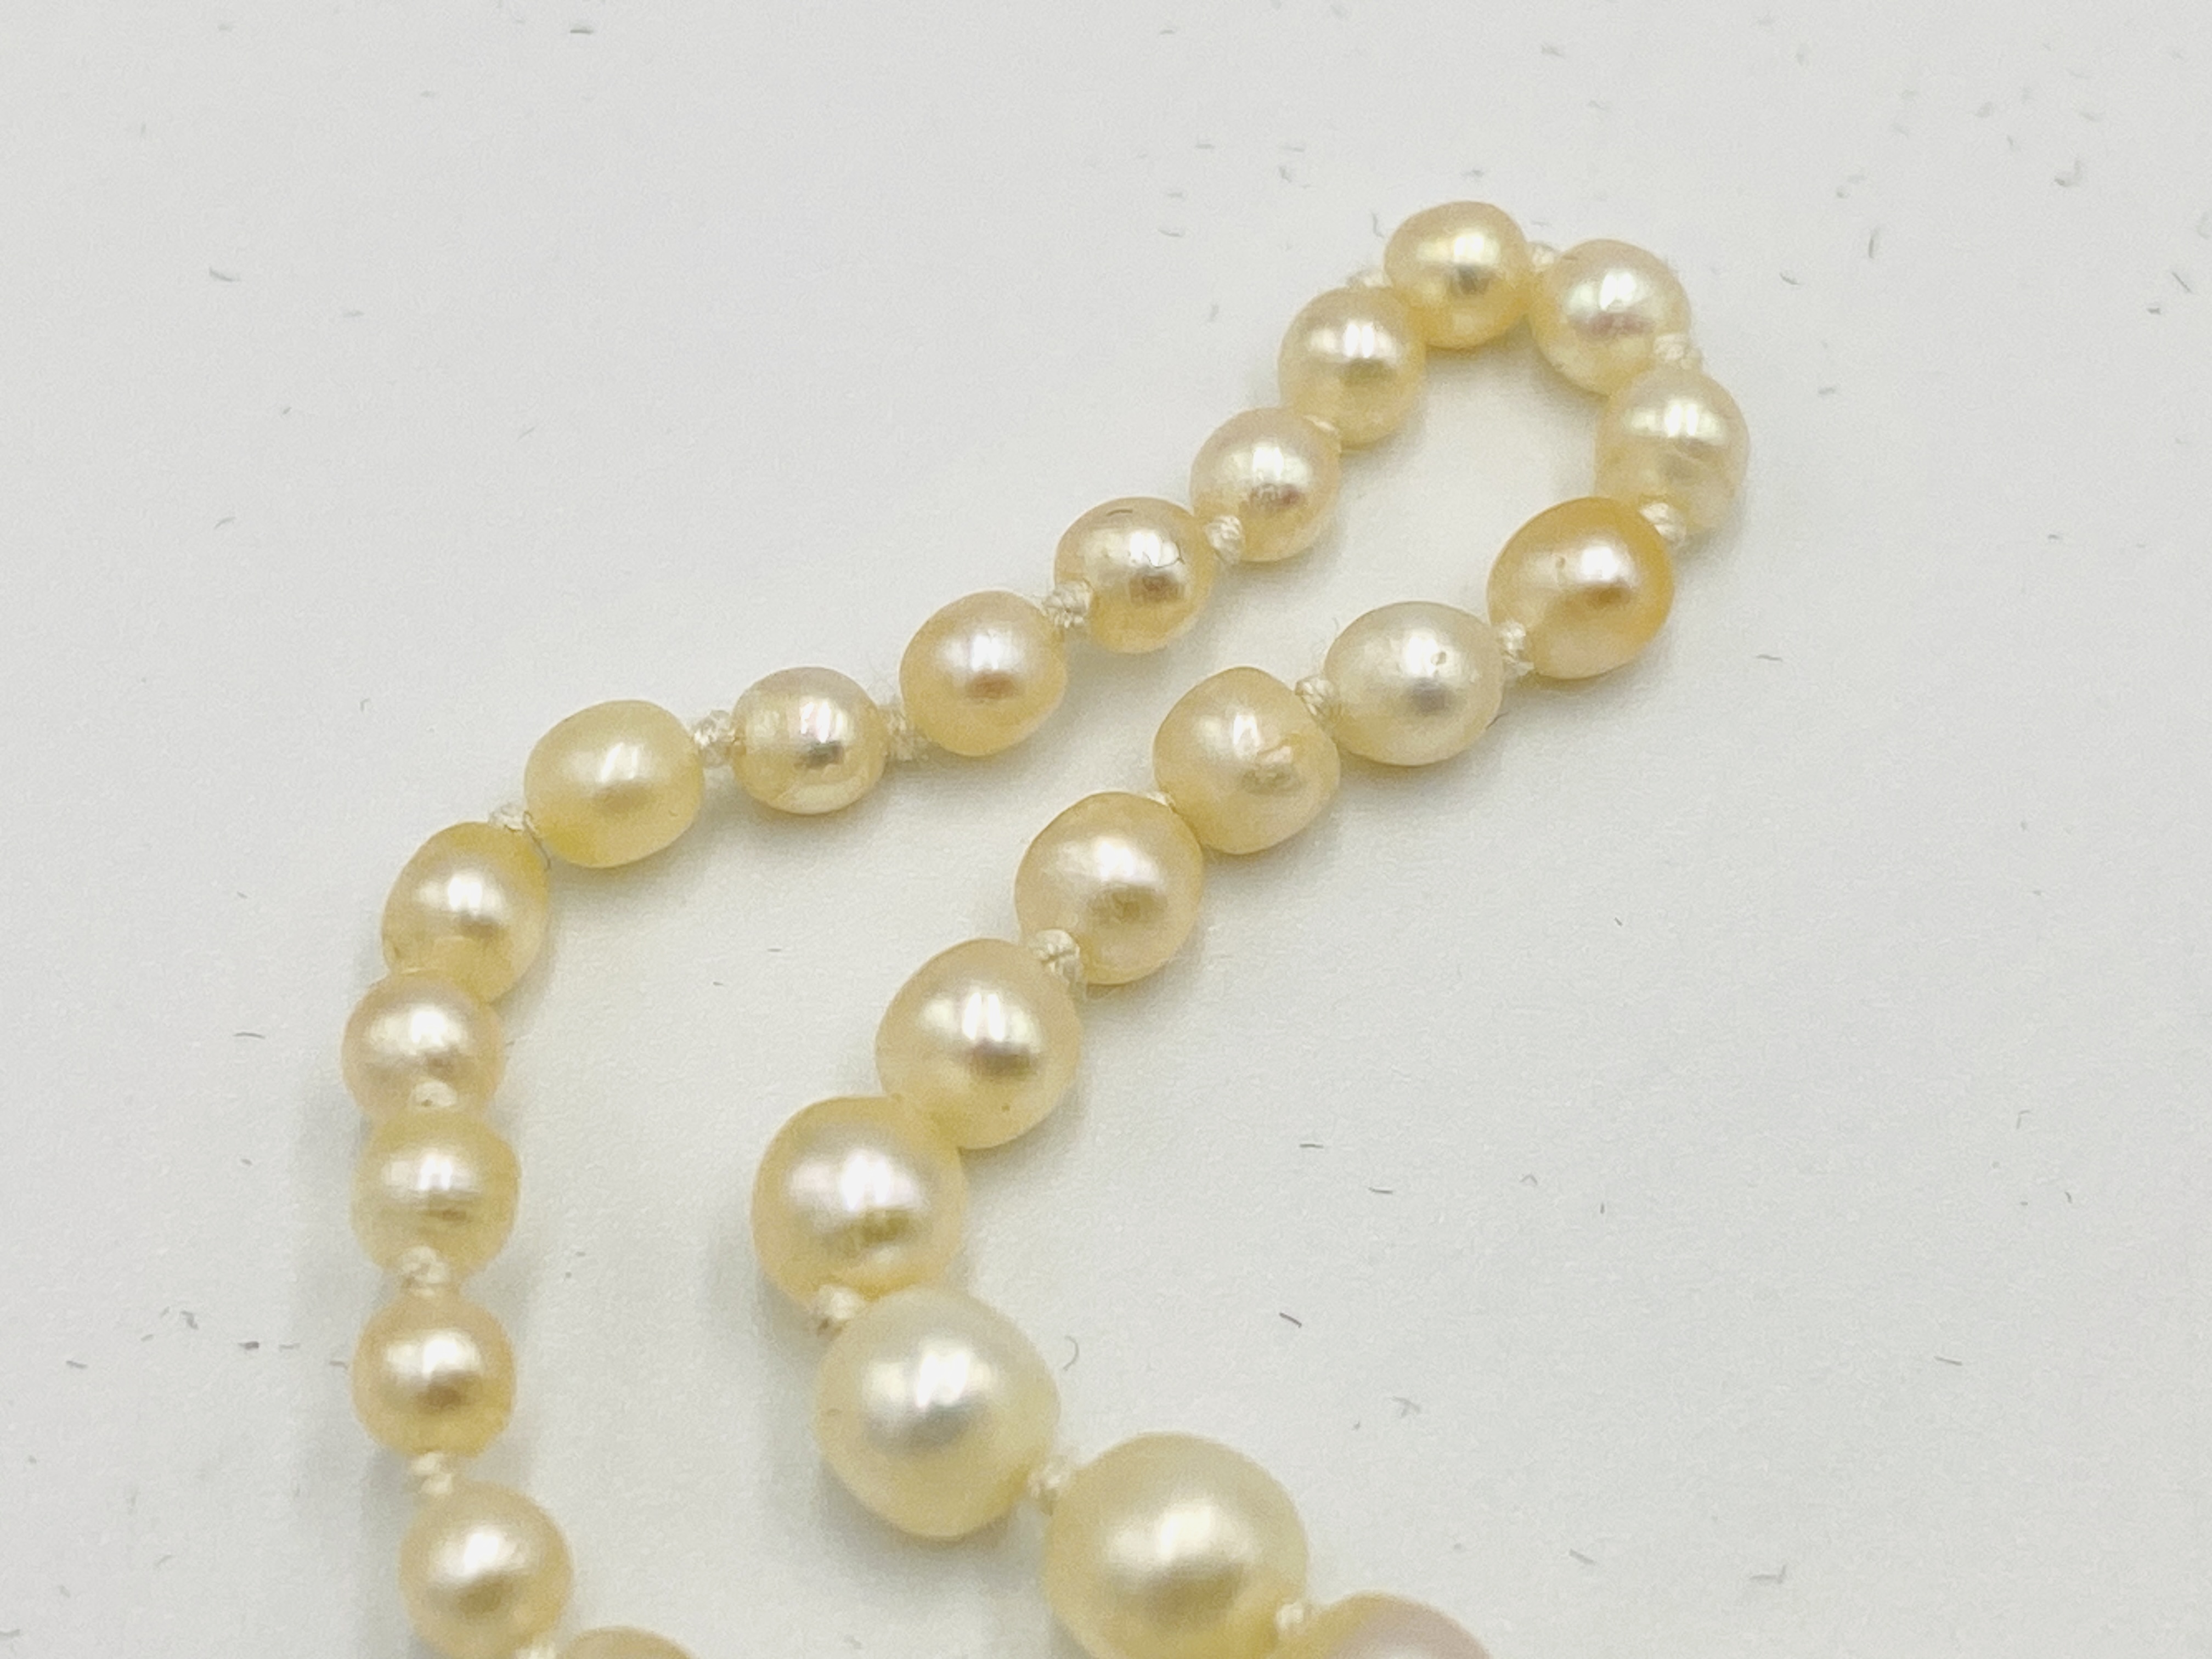 Graduated pearl necklace with certificate - Image 2 of 6